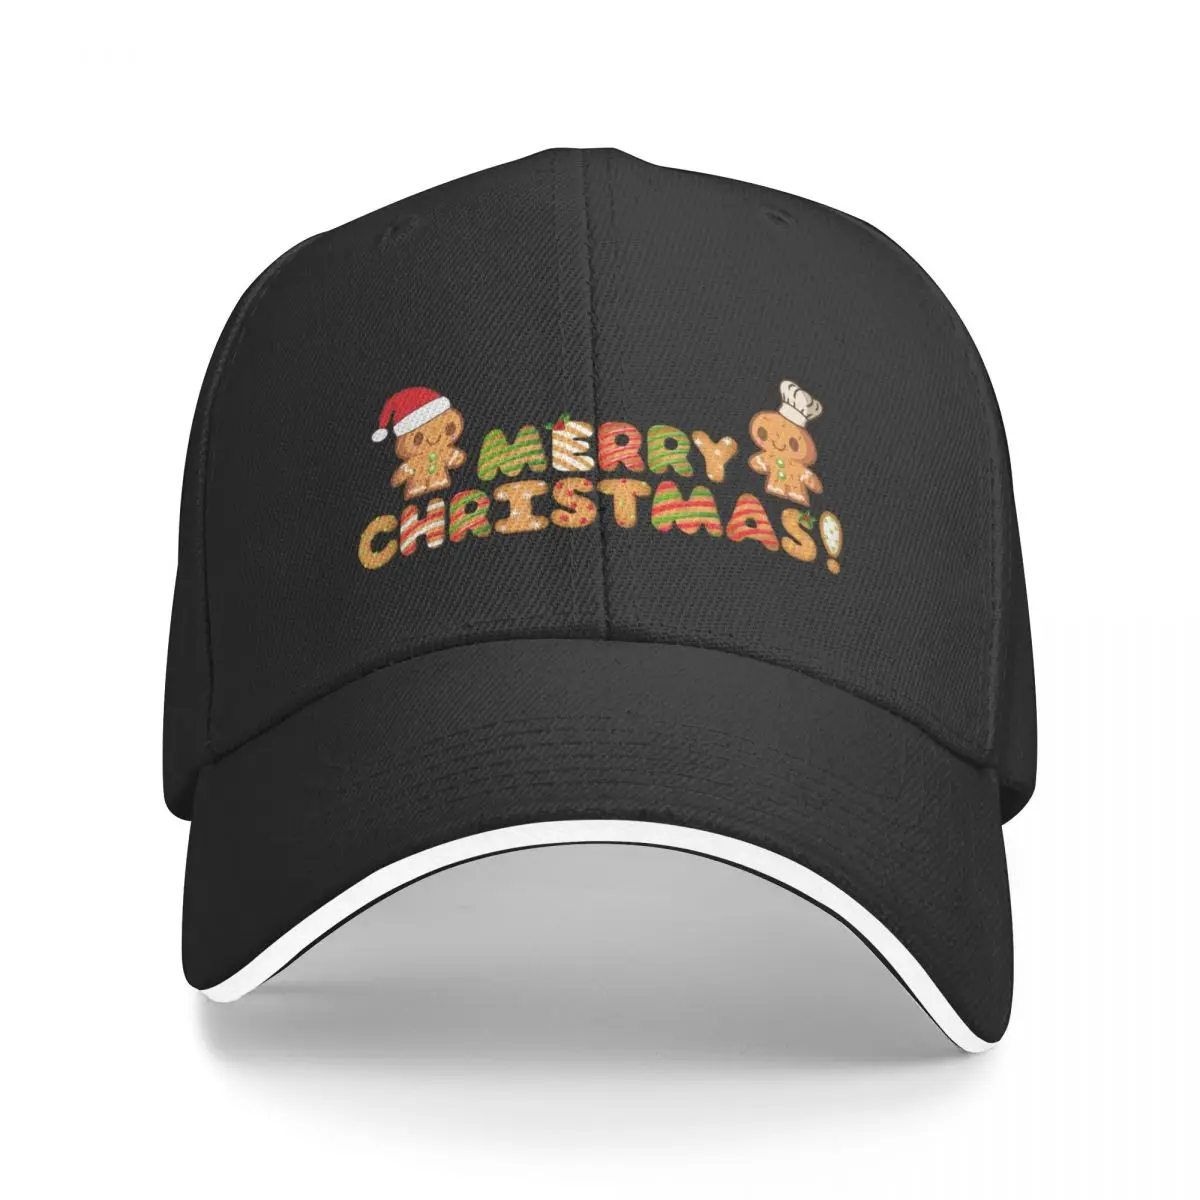 

A Merry Gingerbread Christmas! Baseball Cap Cosplay Golf Wear Mountaineering Icon Hats For Men Women's